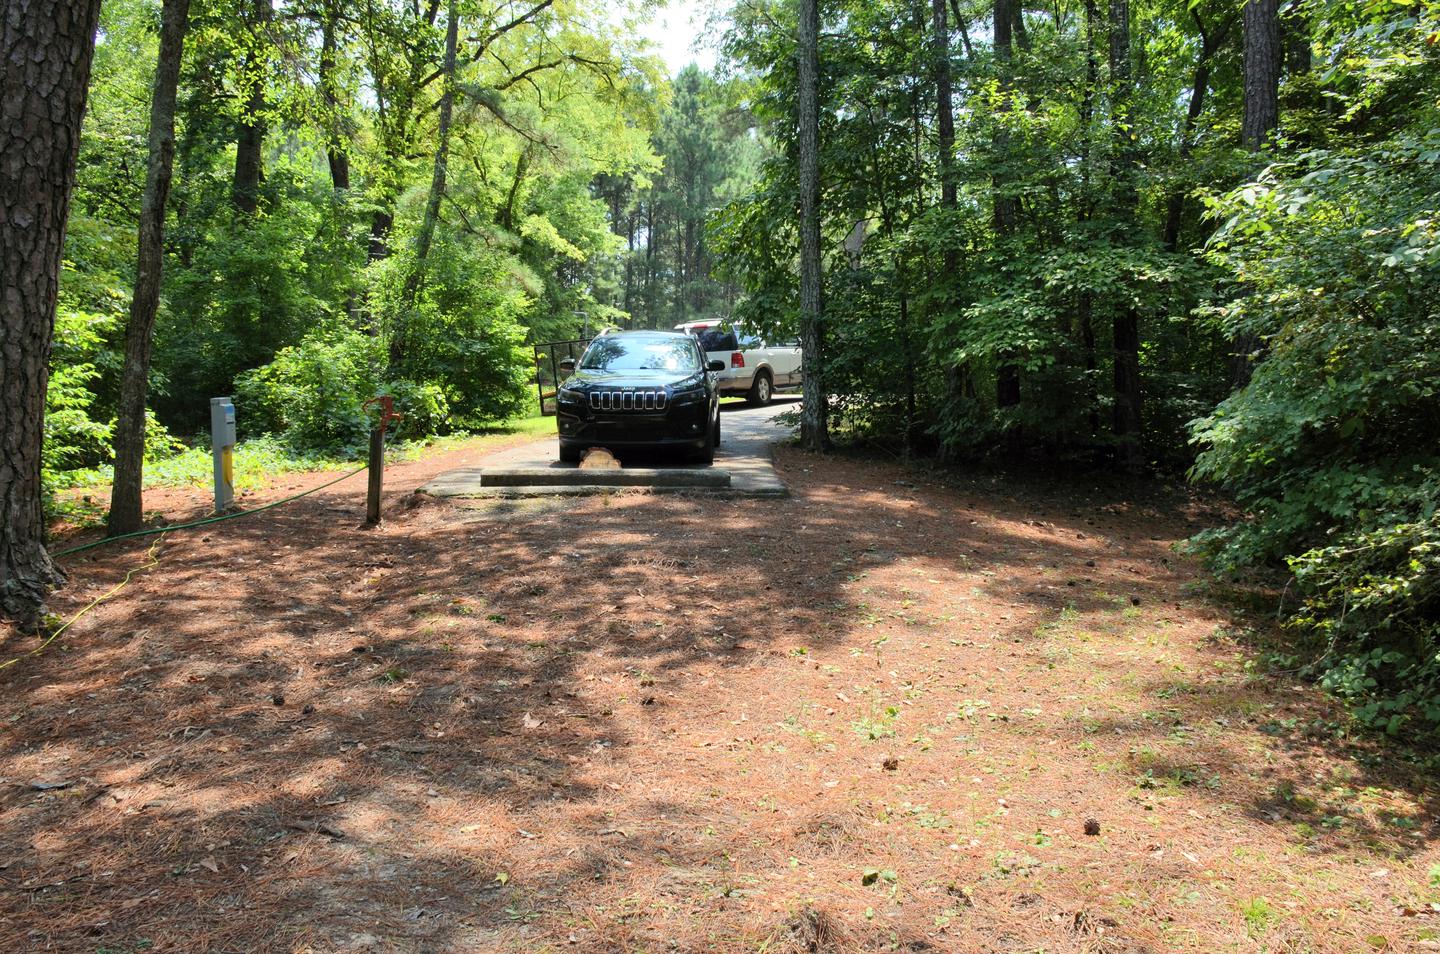 Driveway and slope to campsite.McKaskey Creek Campground, campsite 3.  The walk down from parking spot to campsite.